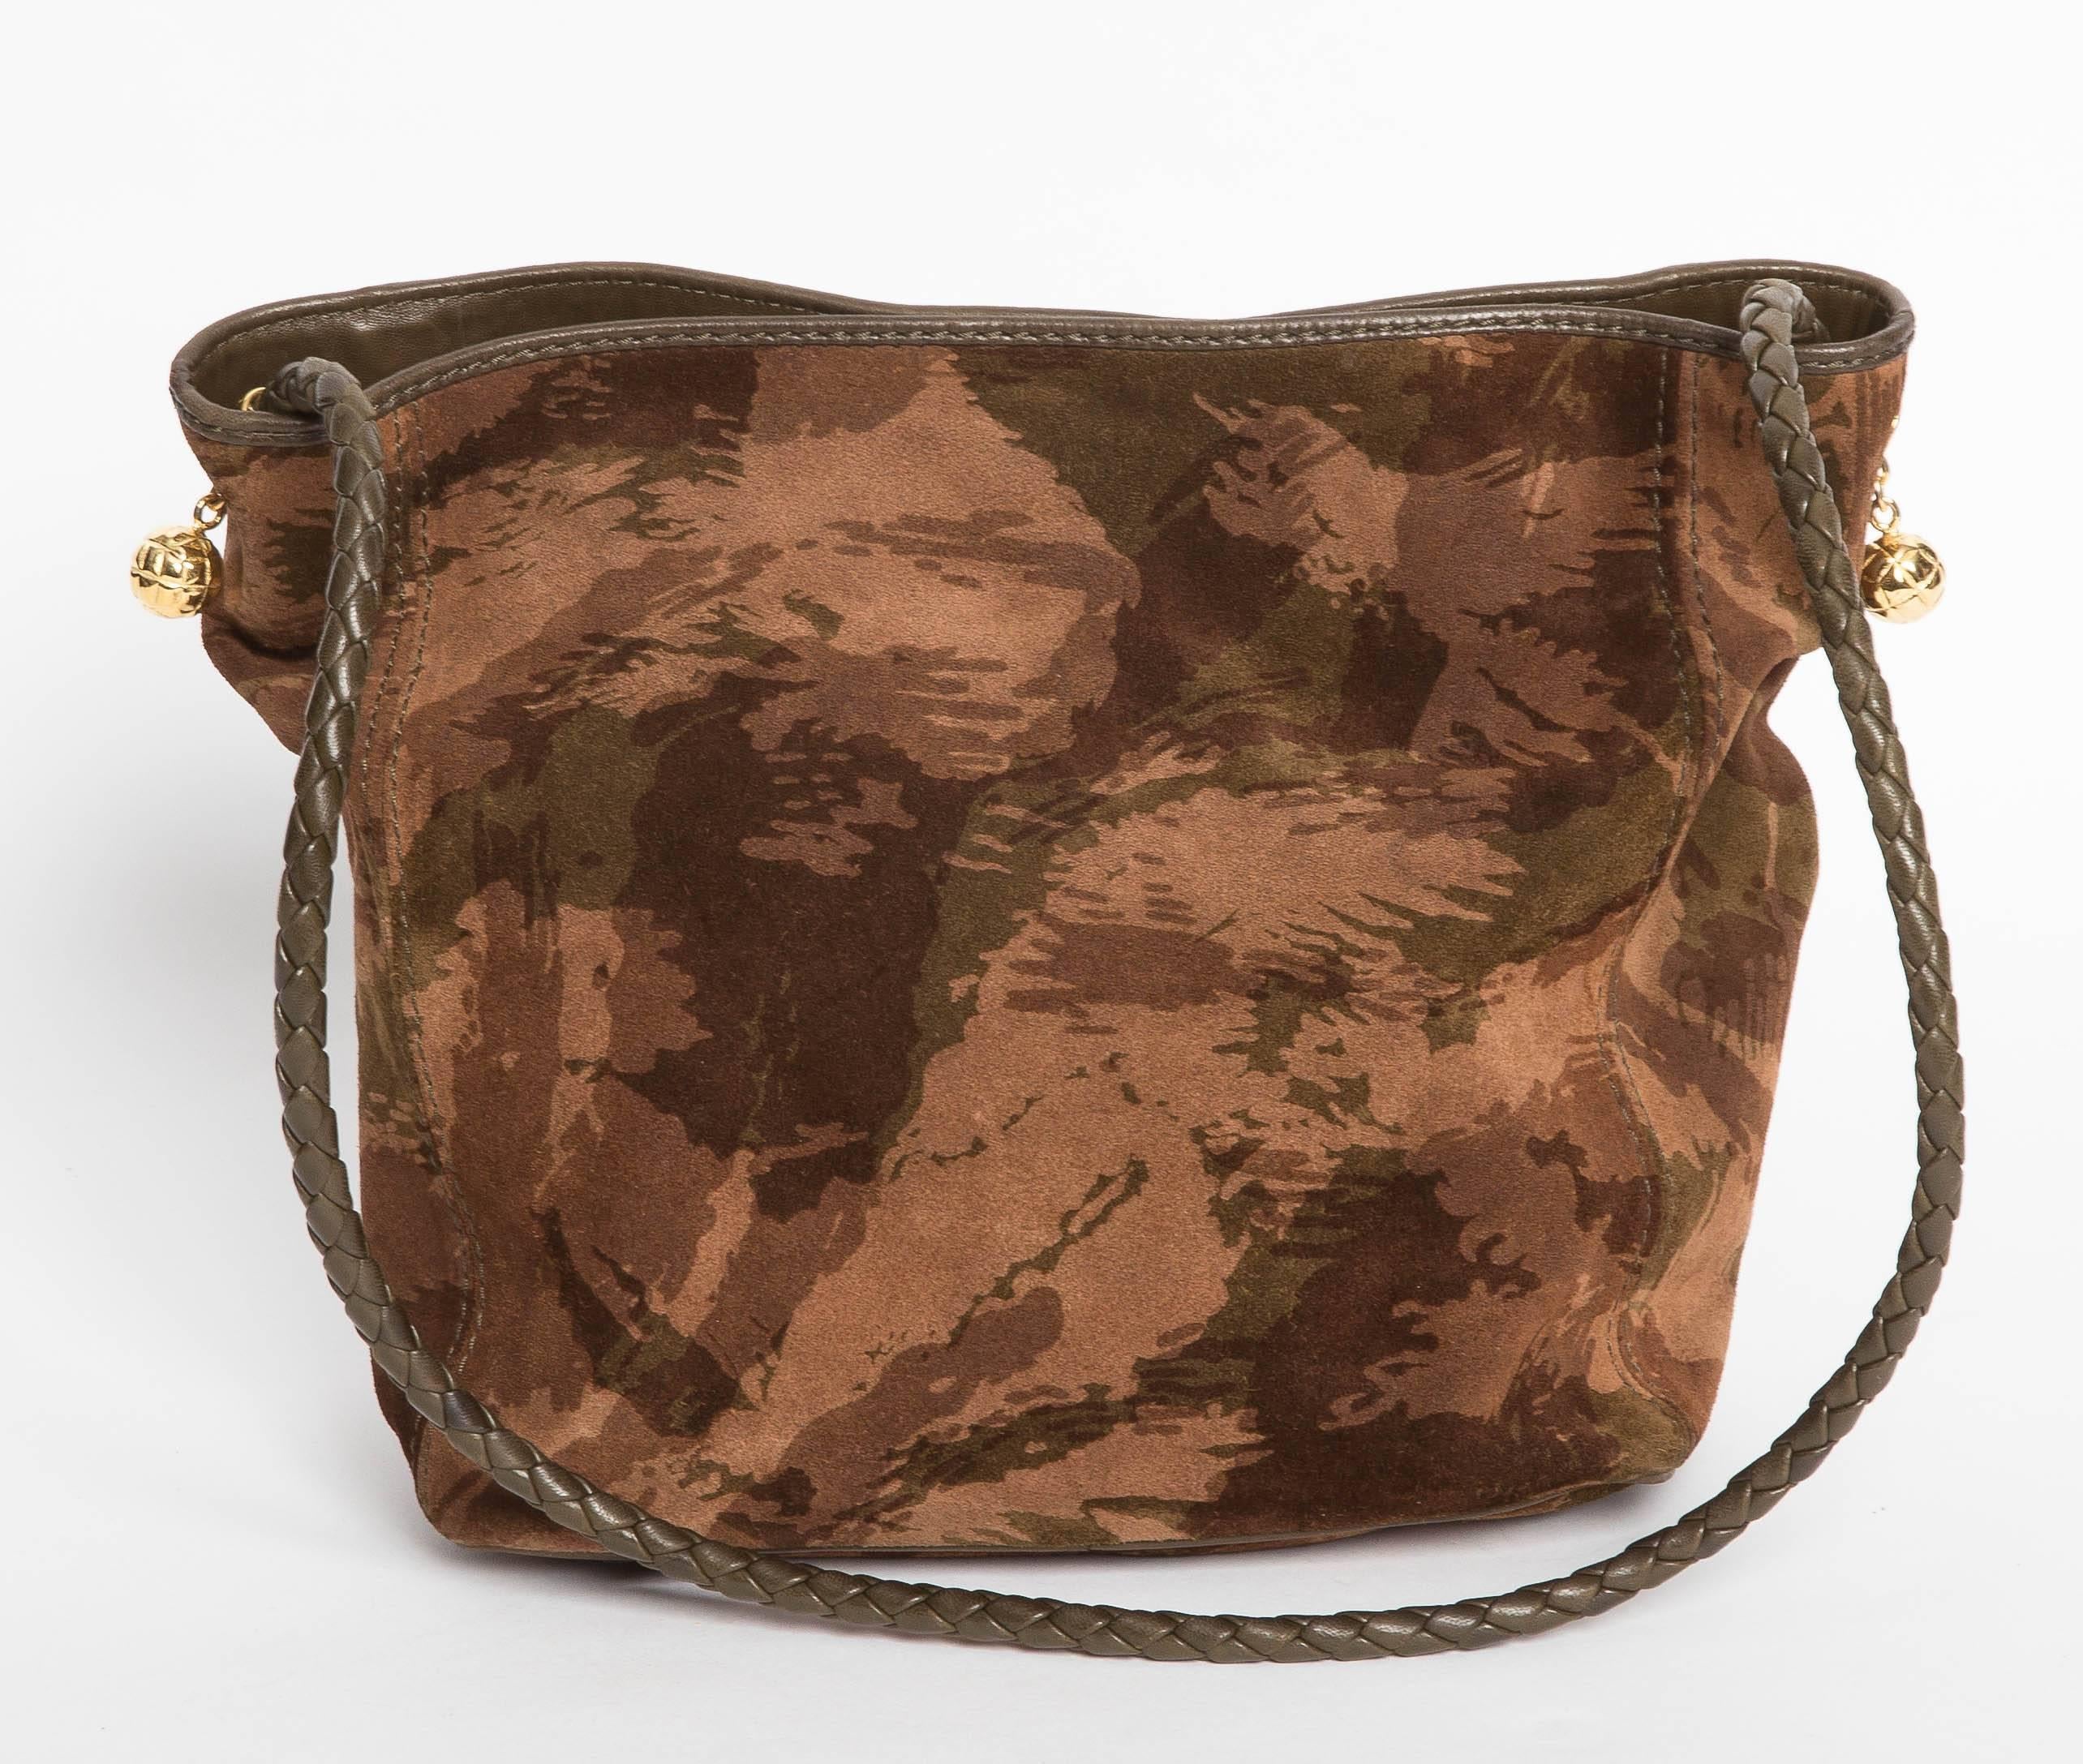 Bottega Veneta Camouflage Suede Tote with Braided Leather Handle and Gold Hardware. This tote is lined in polished cotton and features one inner zip pocket. The handle loops through gold circular openings and features 2 gold ball shaped toggle